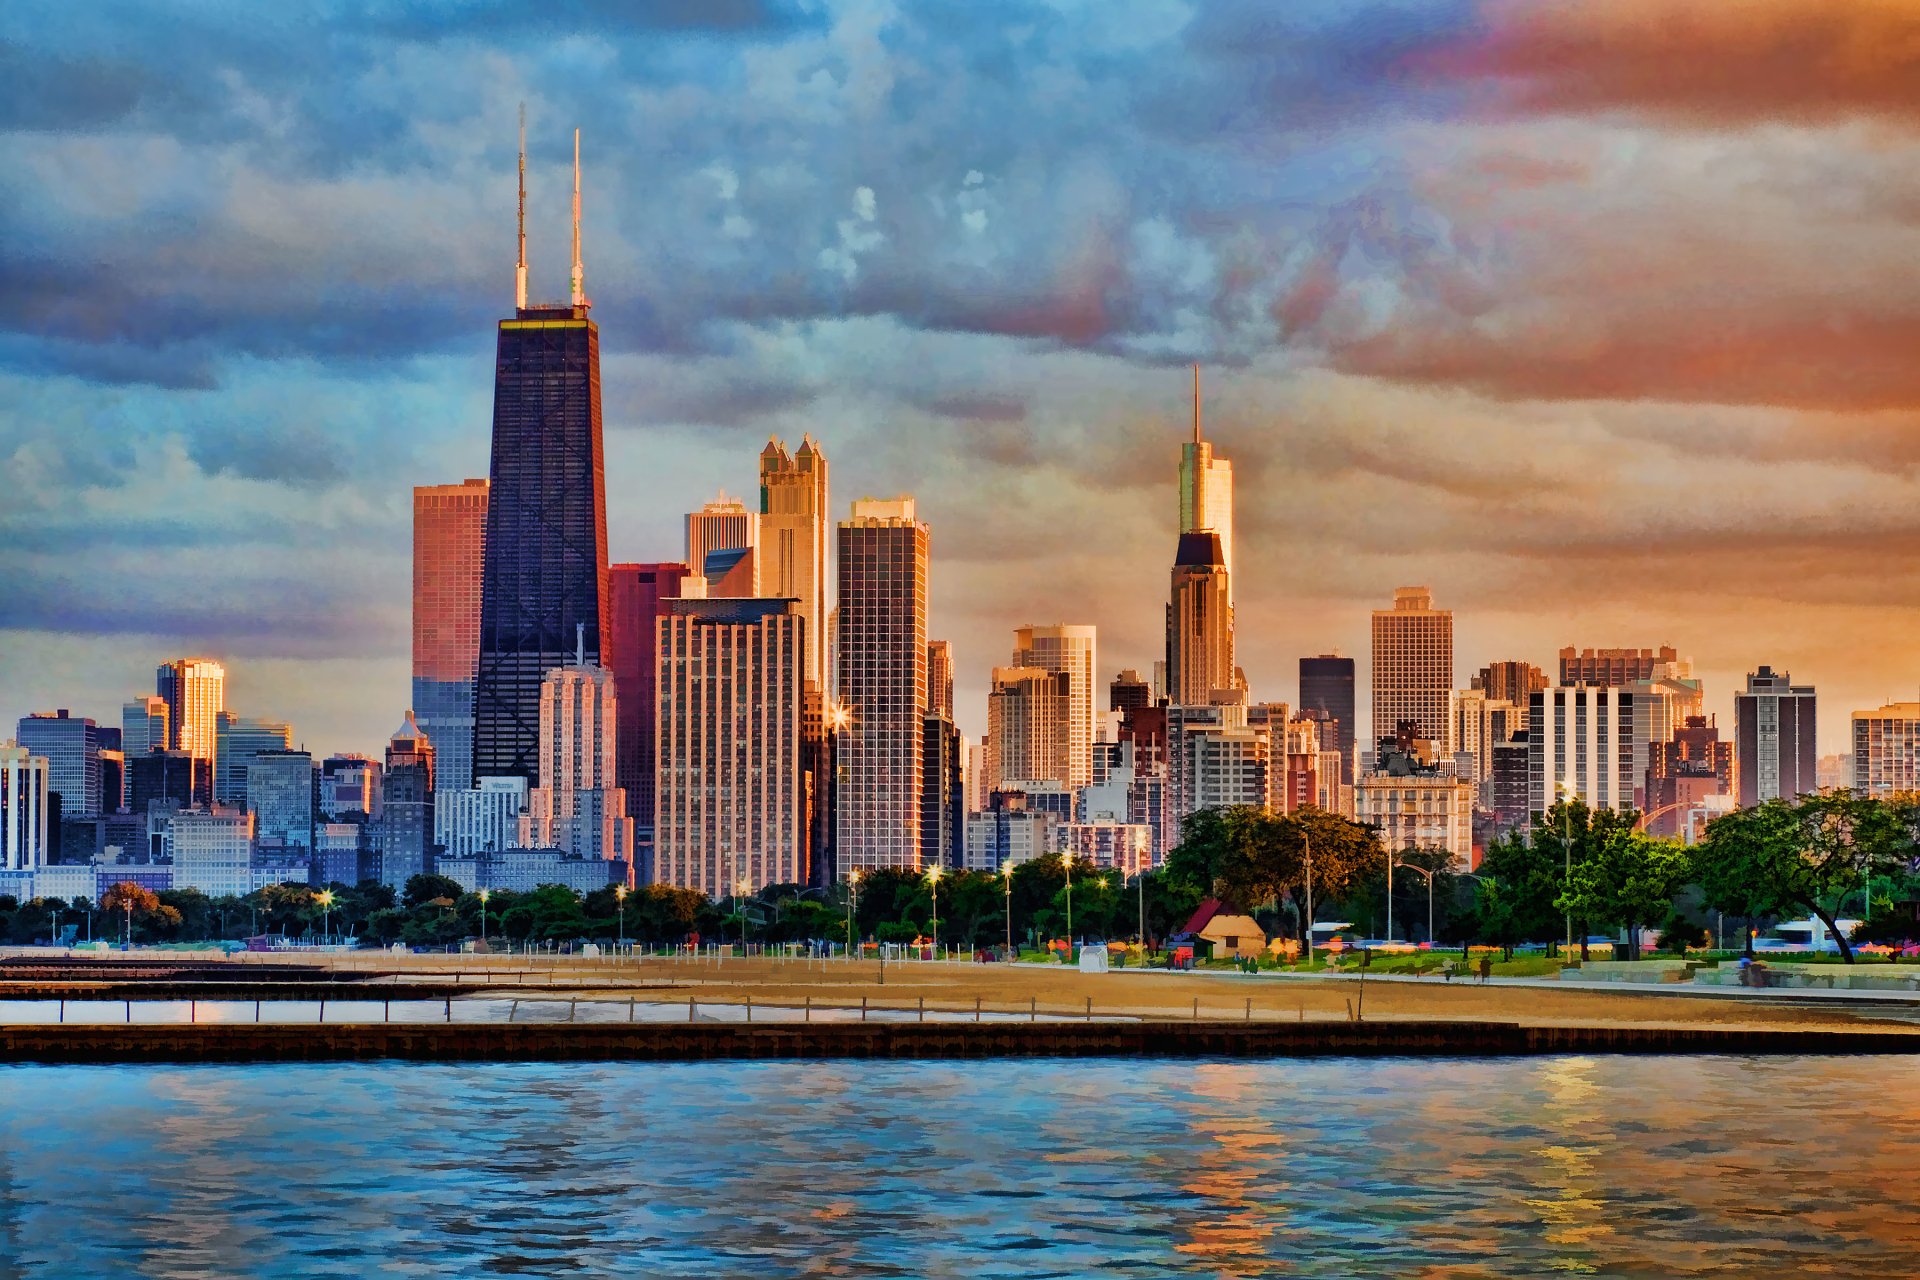 3600x2400 Painting of Chicago - Cityscape Wallpaper Background Image. 